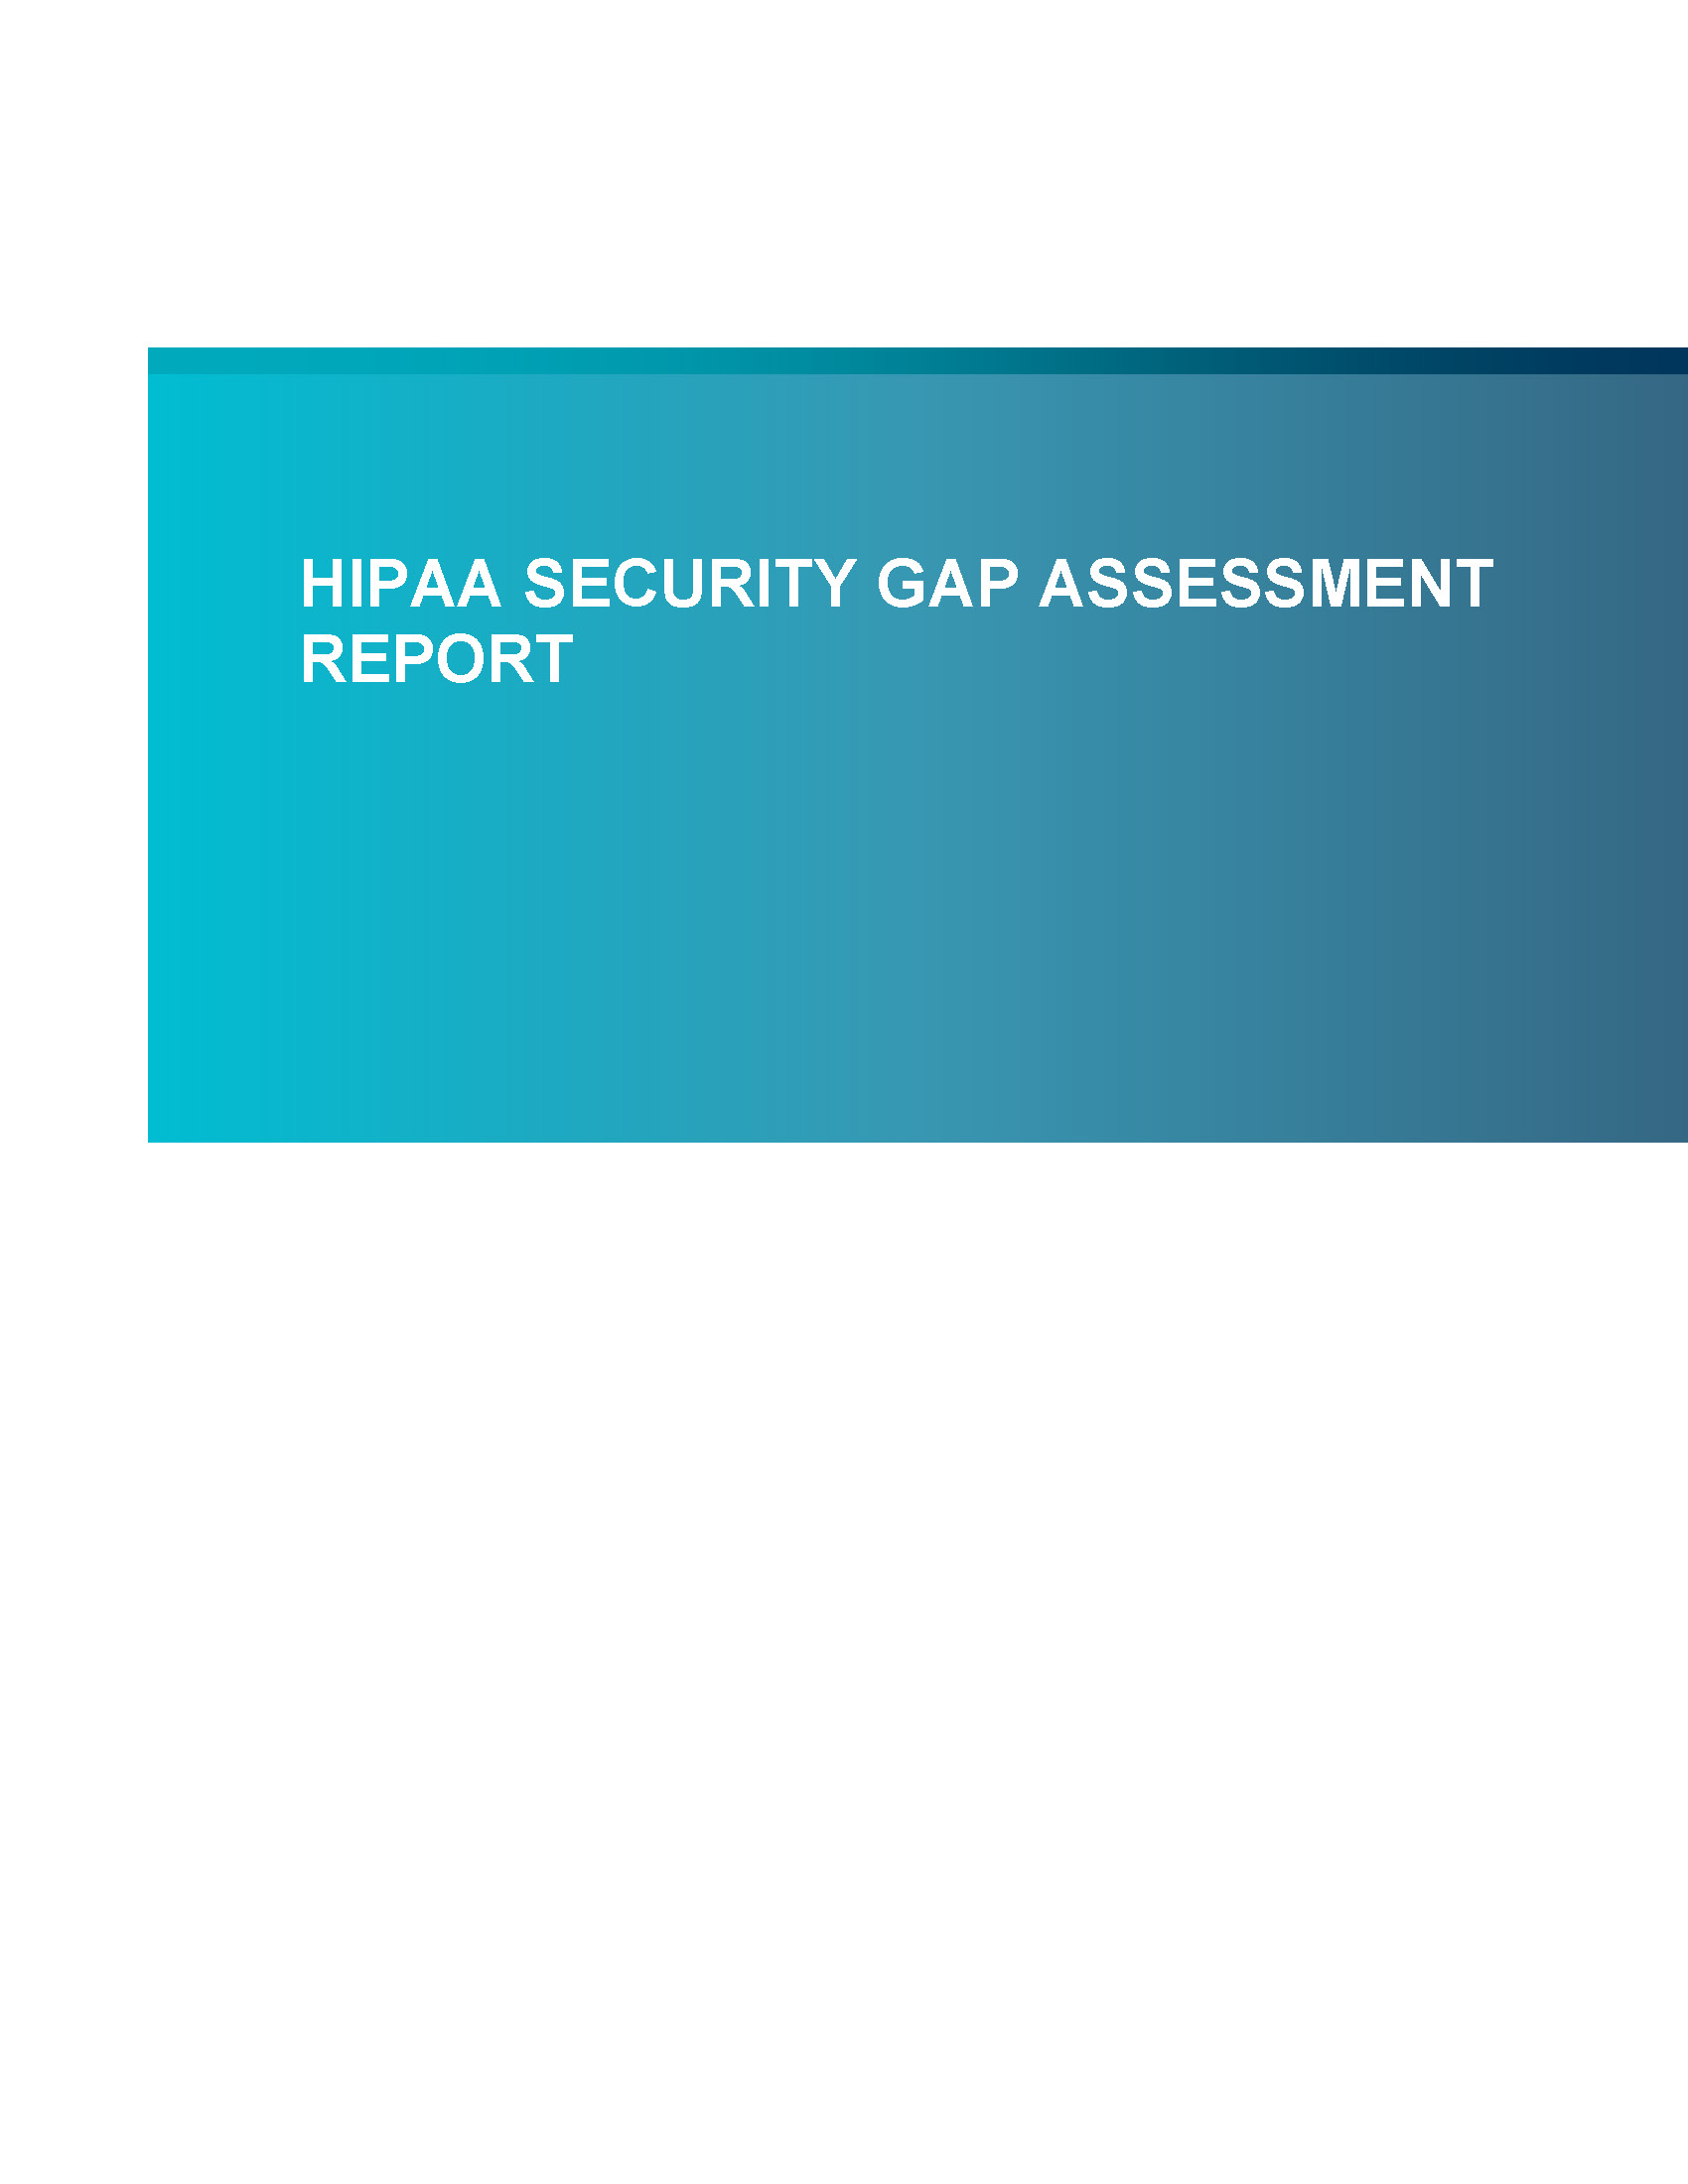 Screenshot of the first page of HIPAA Security Gap Assessment Report